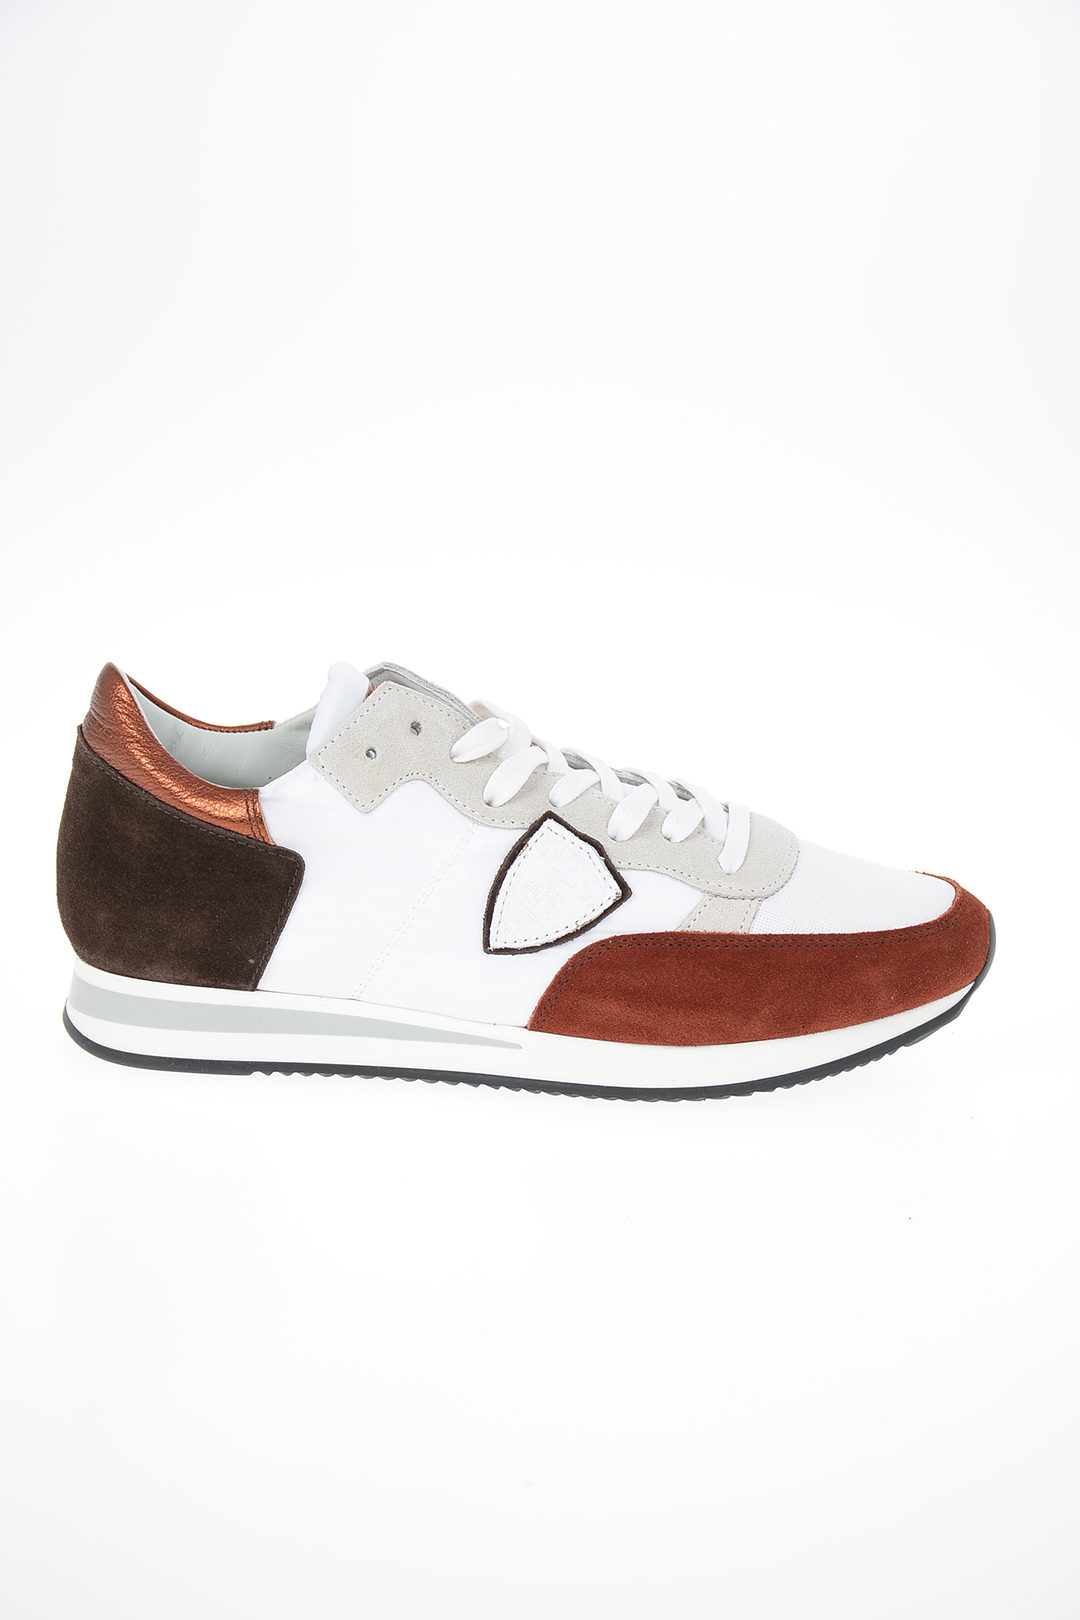 Anbefalede grube sammentrækning Philippe Model Paris Fabric and Leather TROPEZ Sneakers women - Glamood  Outlet